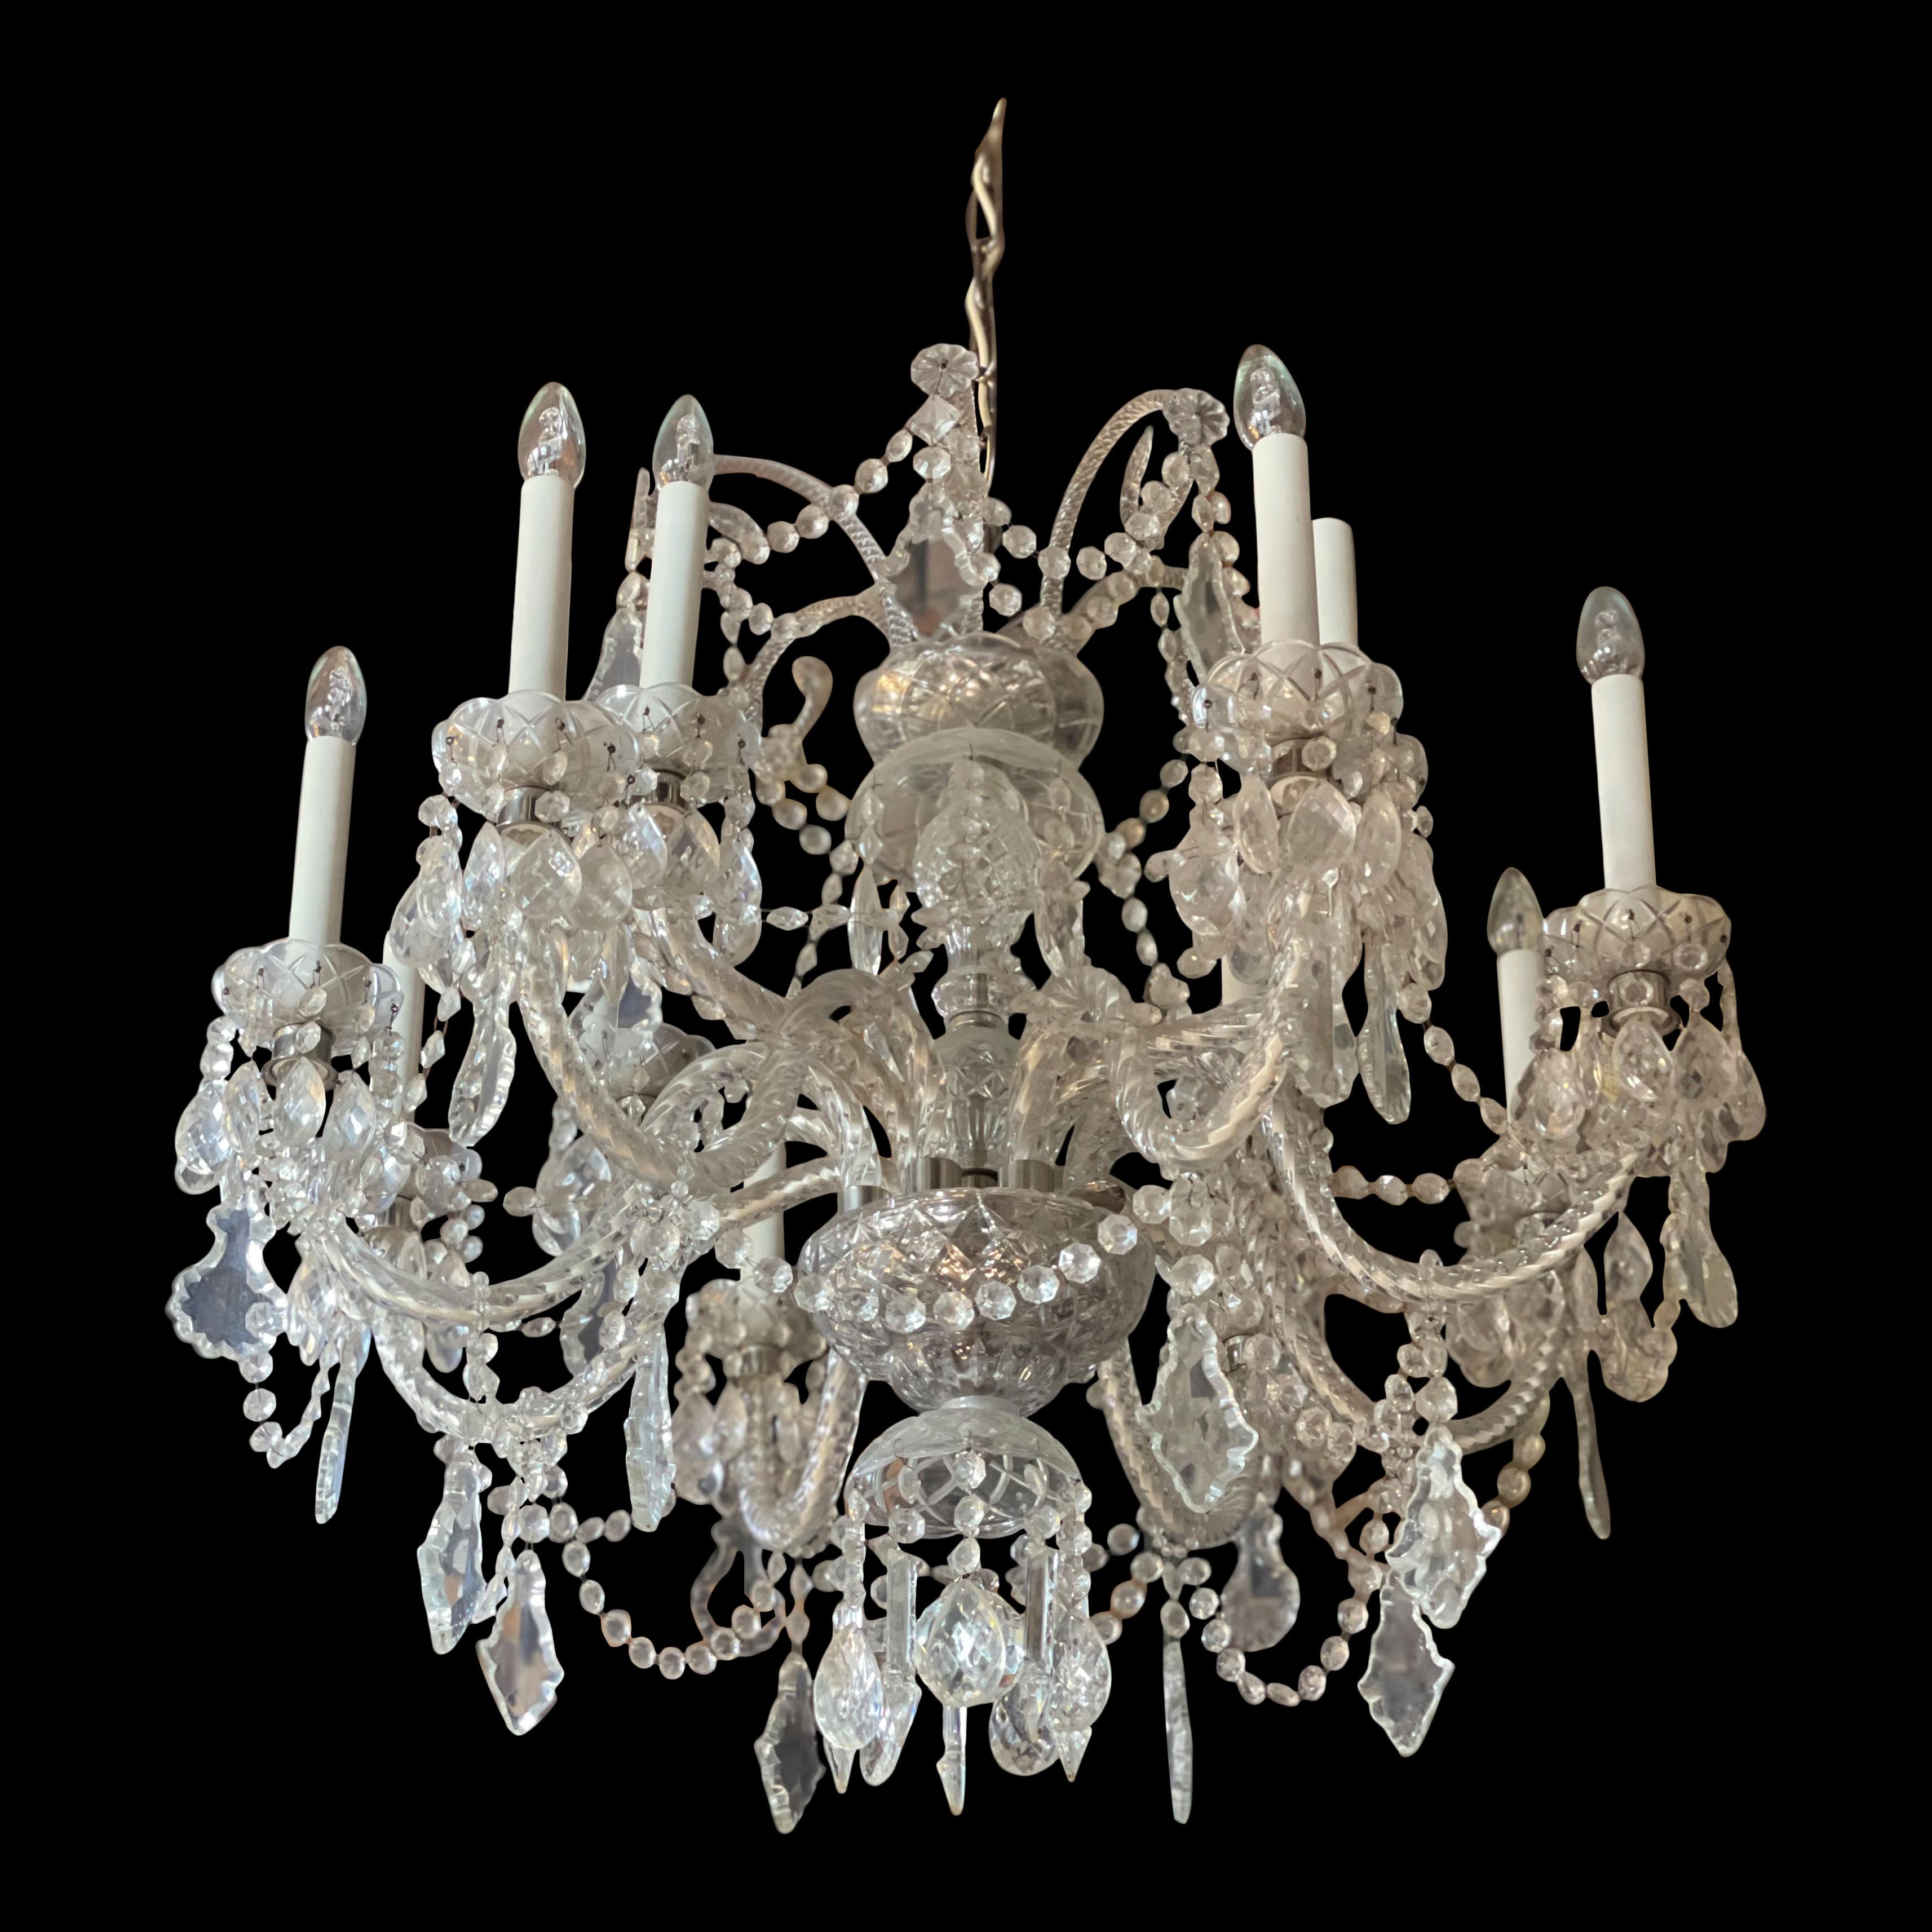 A stunning pair of 20th century cut glass chandeliers taken from the prestigious Royal Albert Hall Mansions.

Have included images from original setting of the prestigious Royal Albert Hall Mansions in London

Sold as a pair or